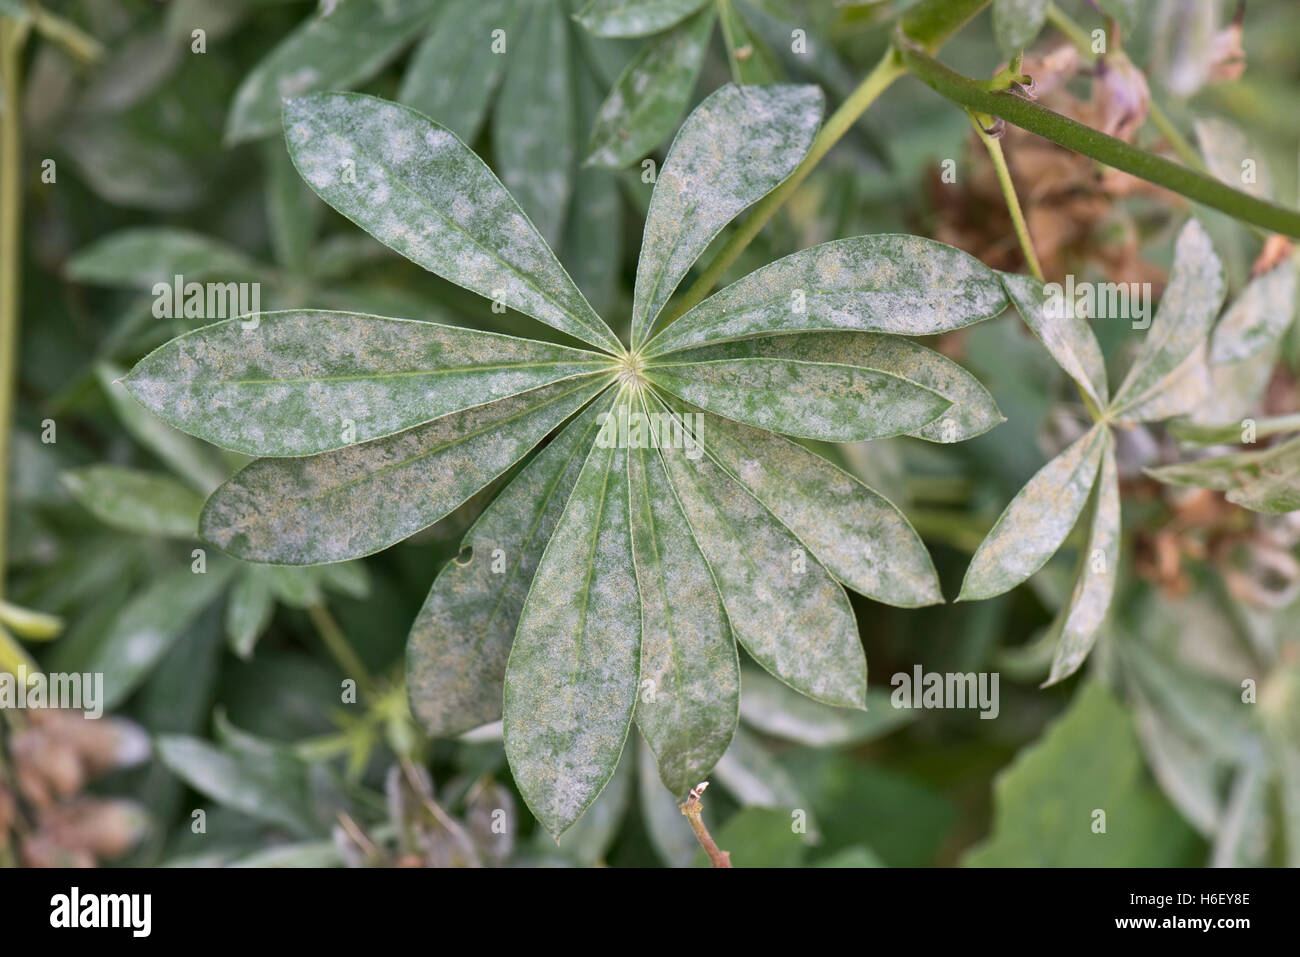 Powdery mildew on lupin, Lupinus sp., leaves Stock Photo